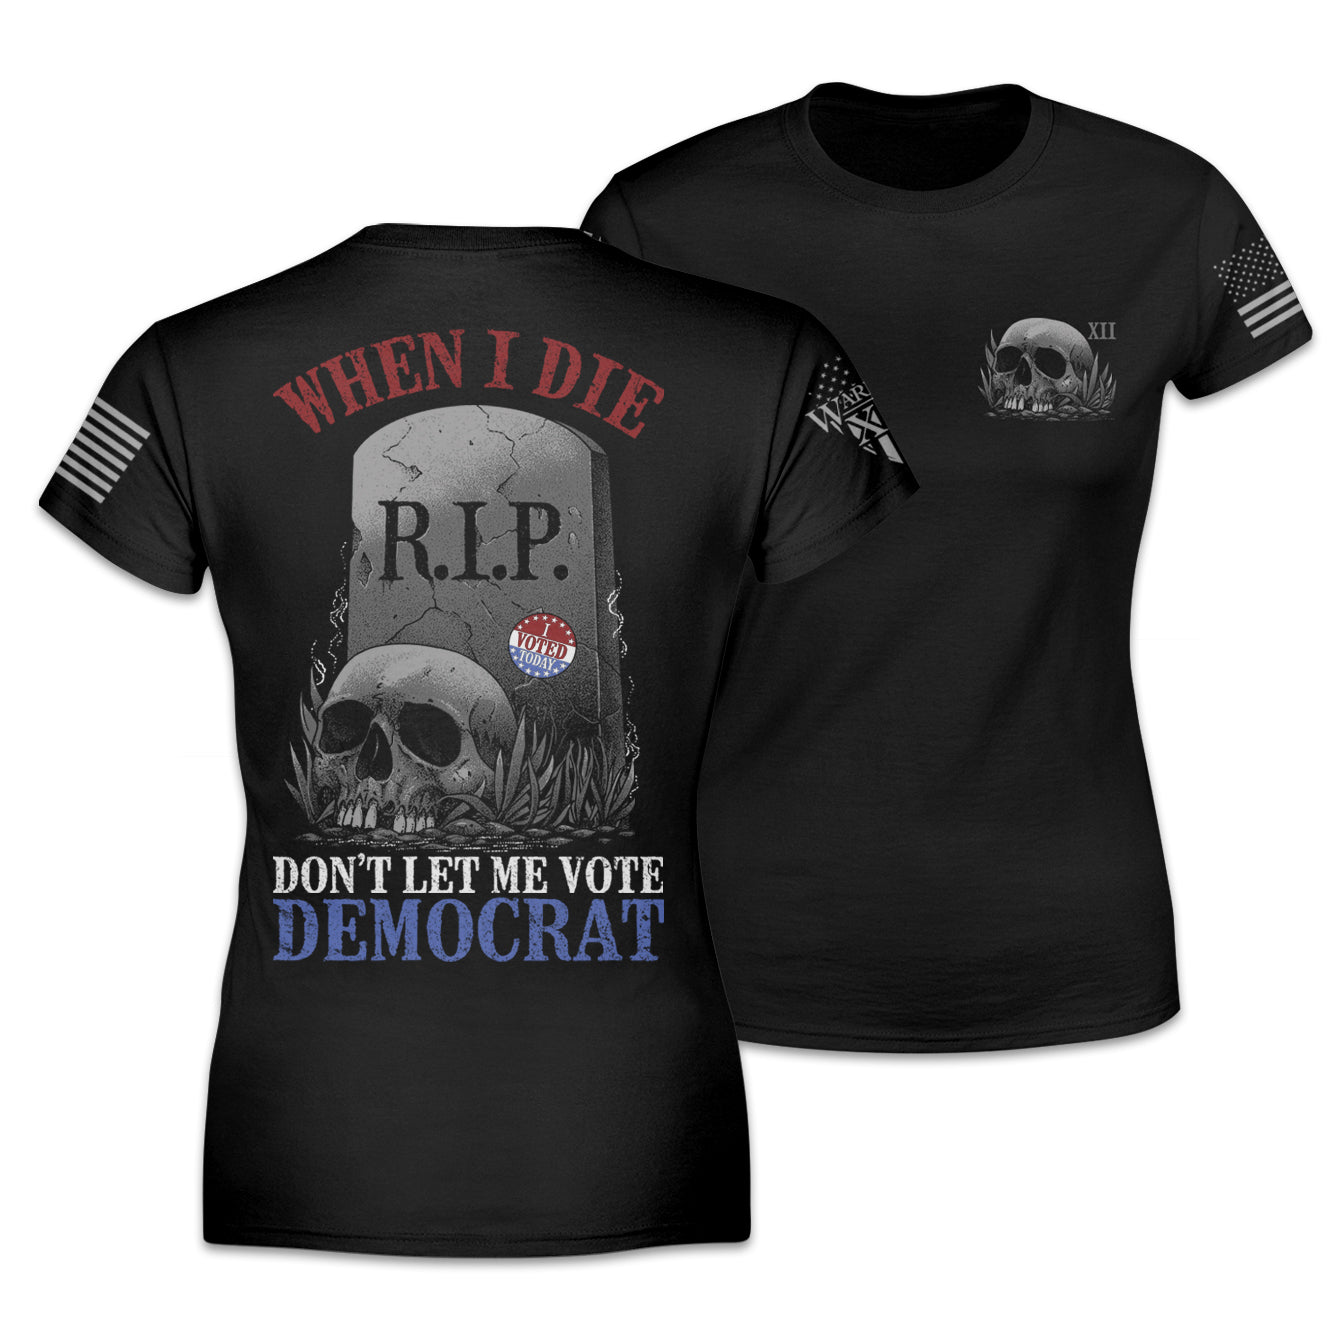 Front and back black women's relaxed t-shirt with the words "When I die, don't let me vote Democrat" with a gravestone and a skull printed on the shirt.